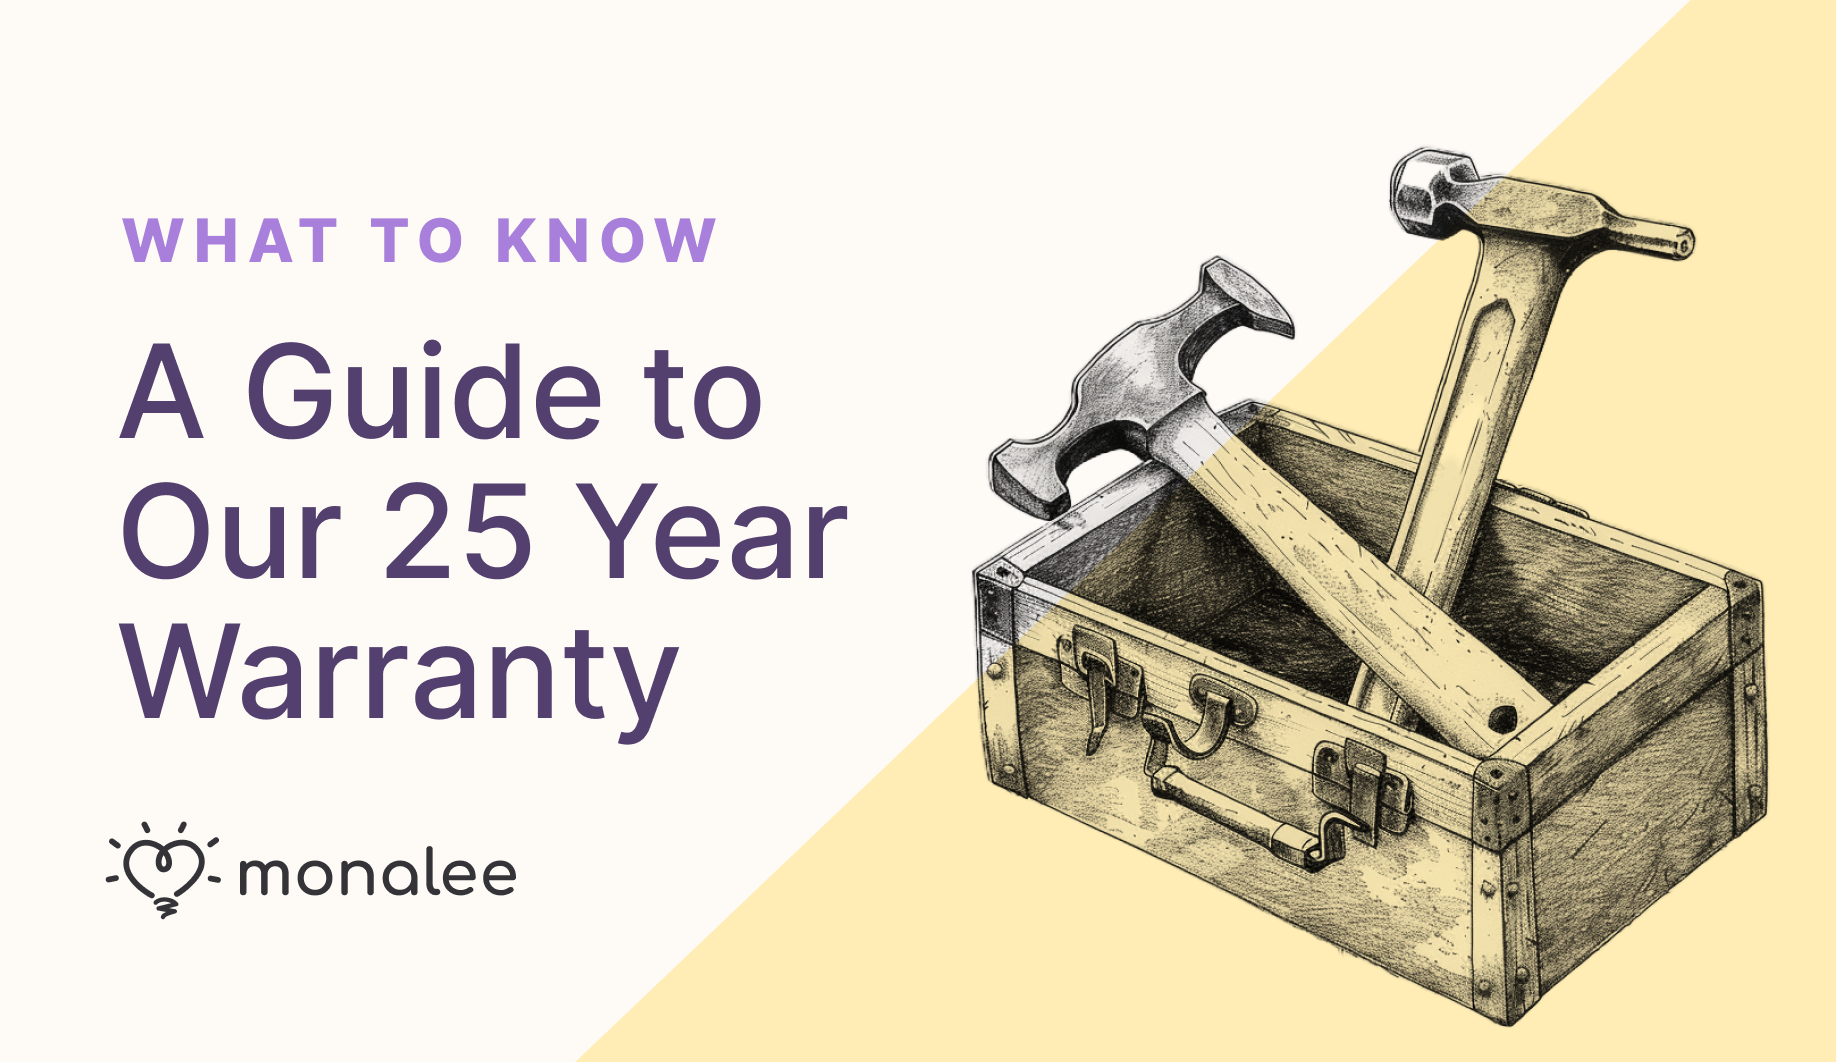 A Guide to our 25 Year Warranty: What to Know